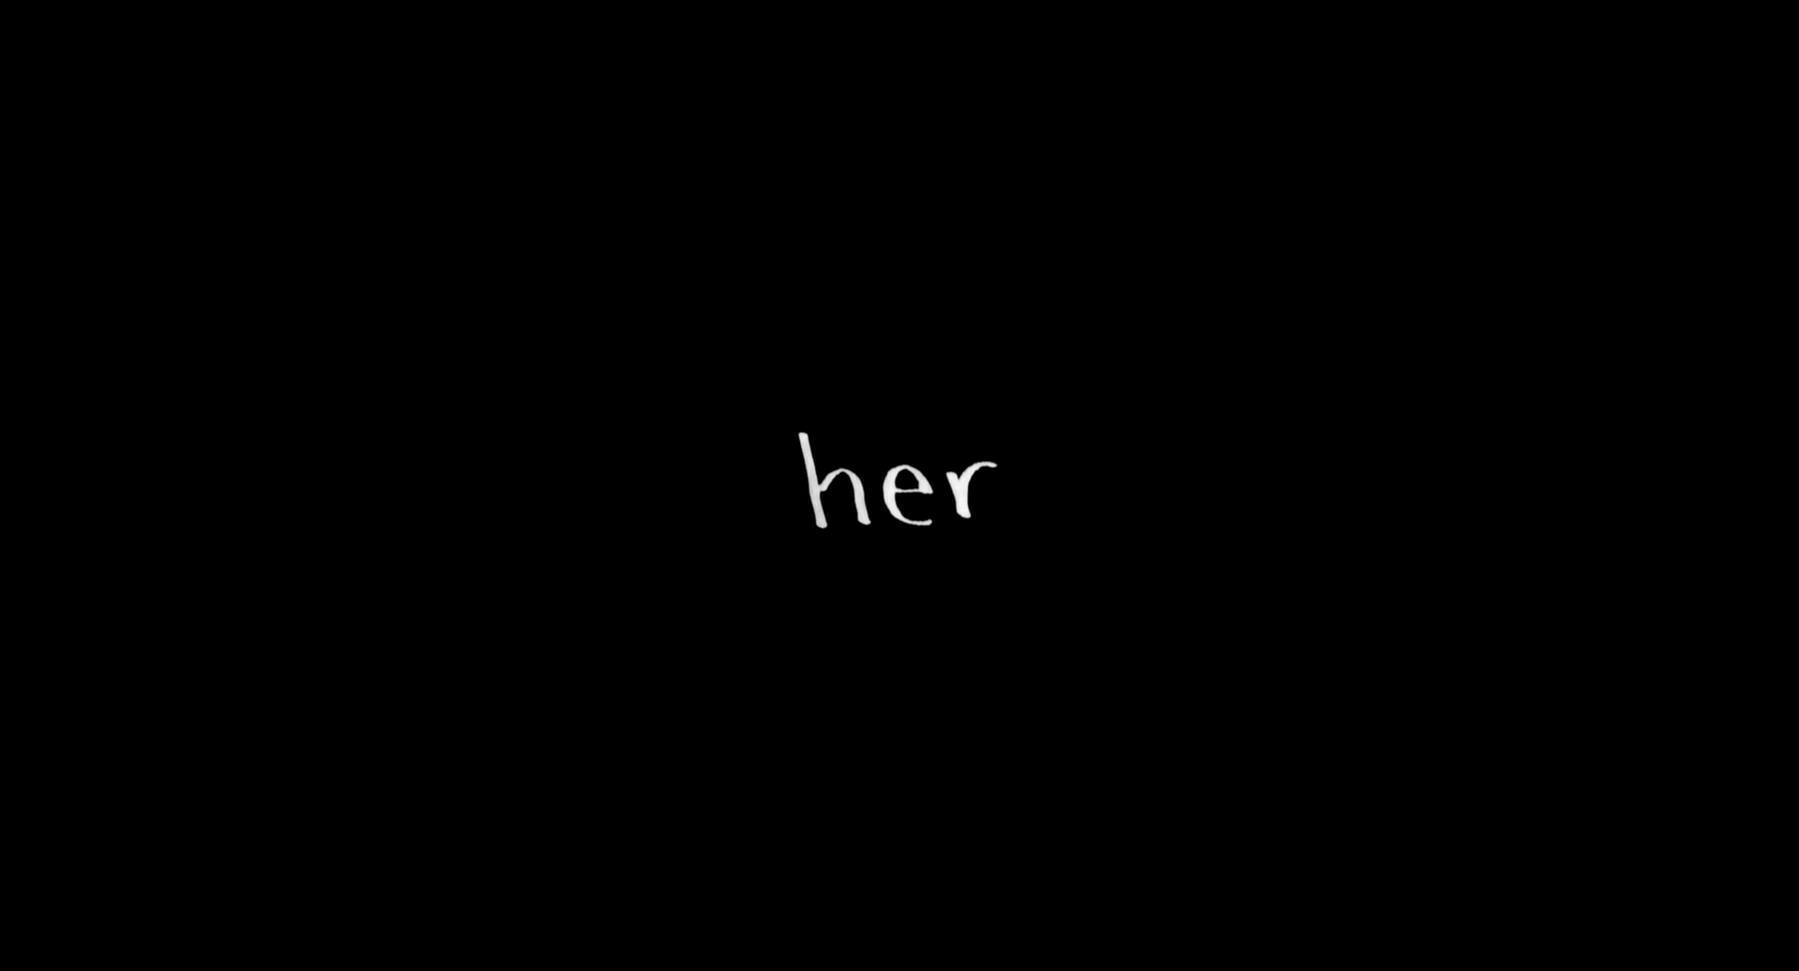 The title card from the film, Her.